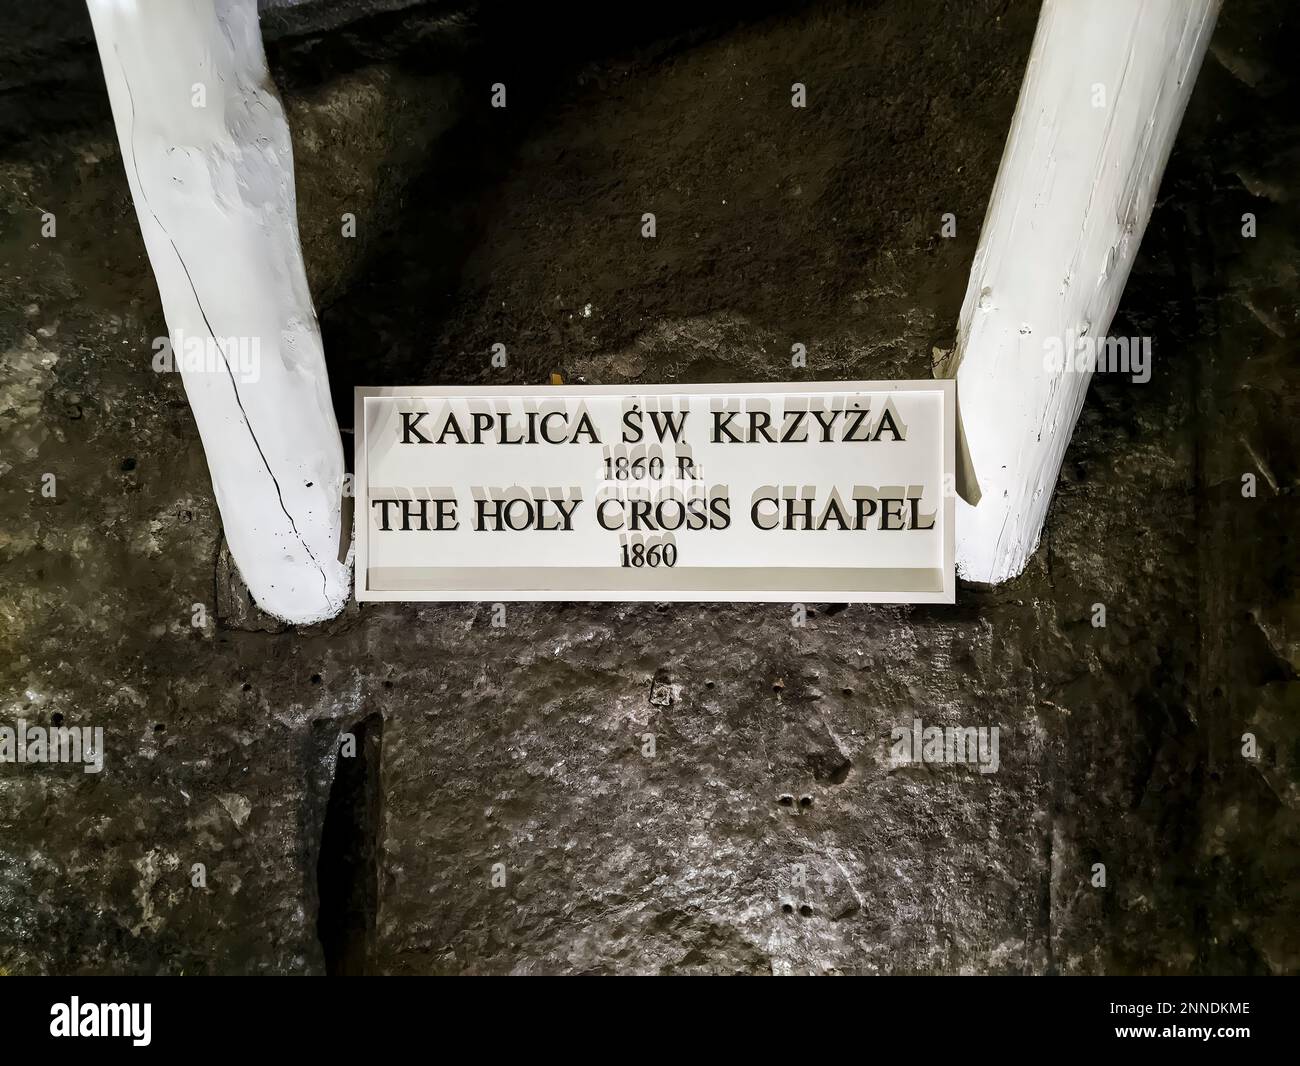 The Holy Cross Chapel - information board. Wieliczka Salt Mine. The mine was inscribed on the UNESCO World Heritage List in 1978. Stock Photo